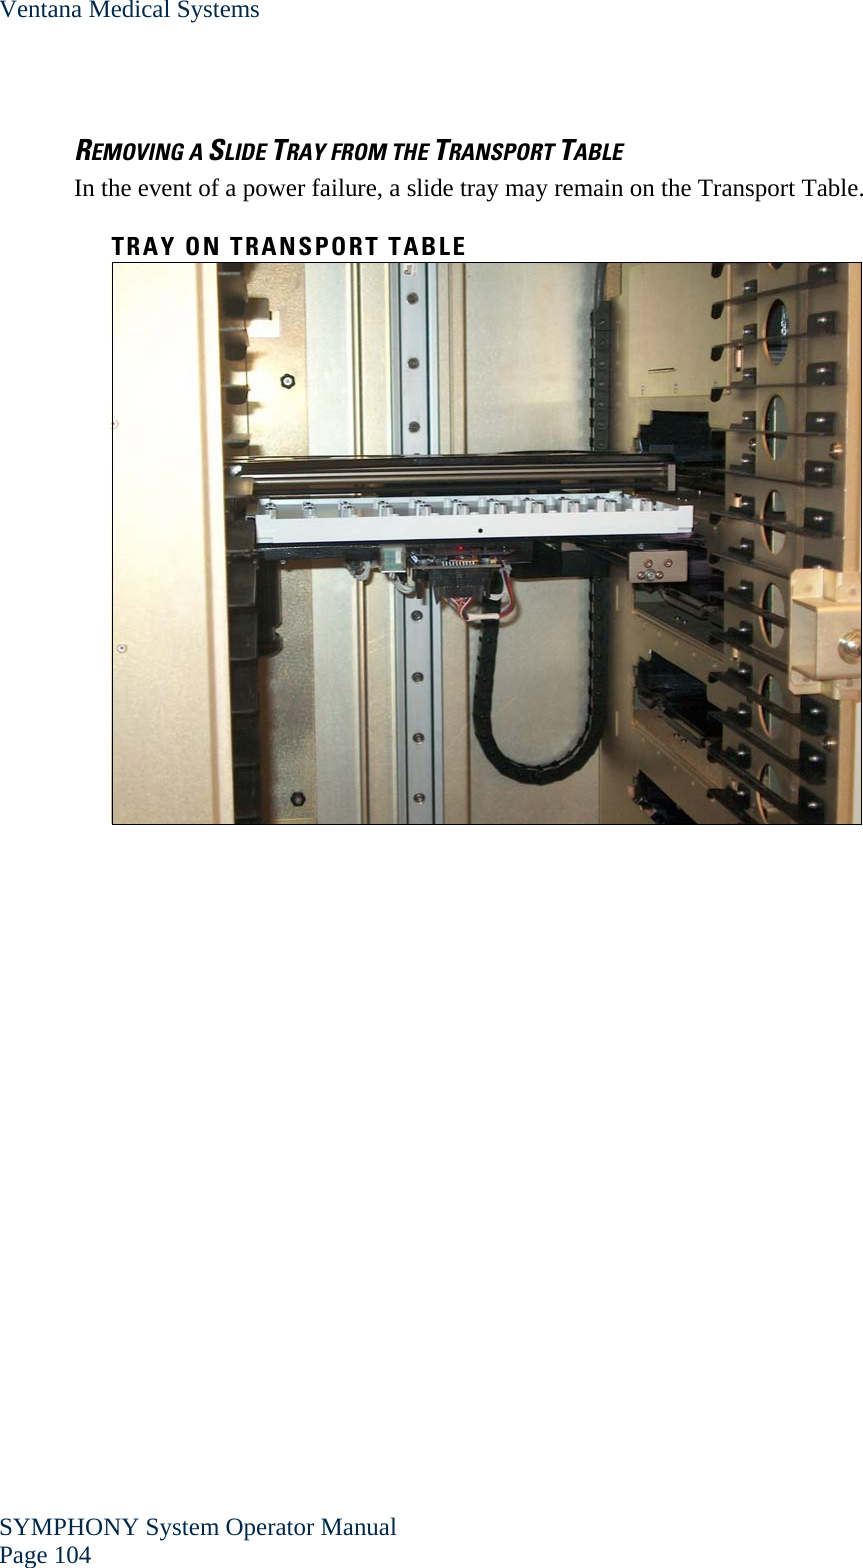 Ventana Medical Systems SYMPHONY System Operator Manual Page 104    REMOVING A SLIDE TRAY FROM THE TRANSPORT TABLE In the event of a power failure, a slide tray may remain on the Transport Table.  TRAY ON TRANSPORT TABLE      